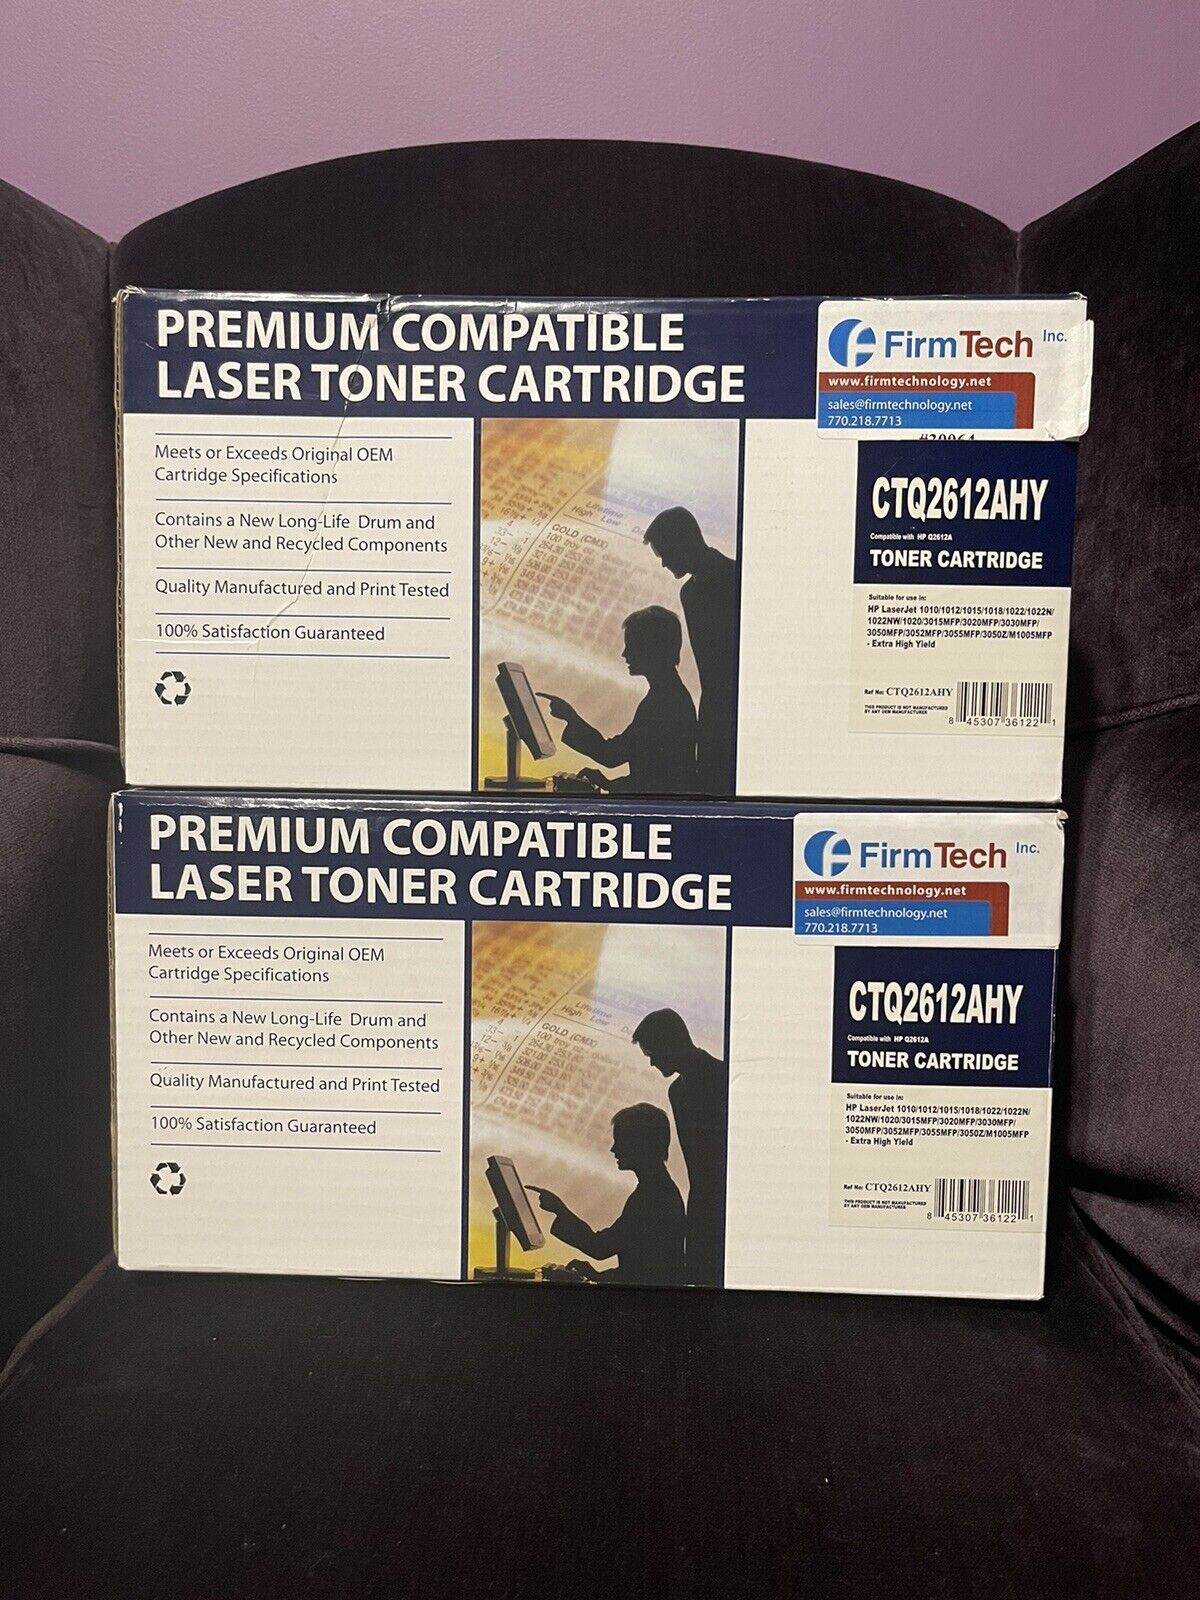 2 Premium Compatible Laser Toner Cartridge CTQ2612AHY Brother NEW Sealed